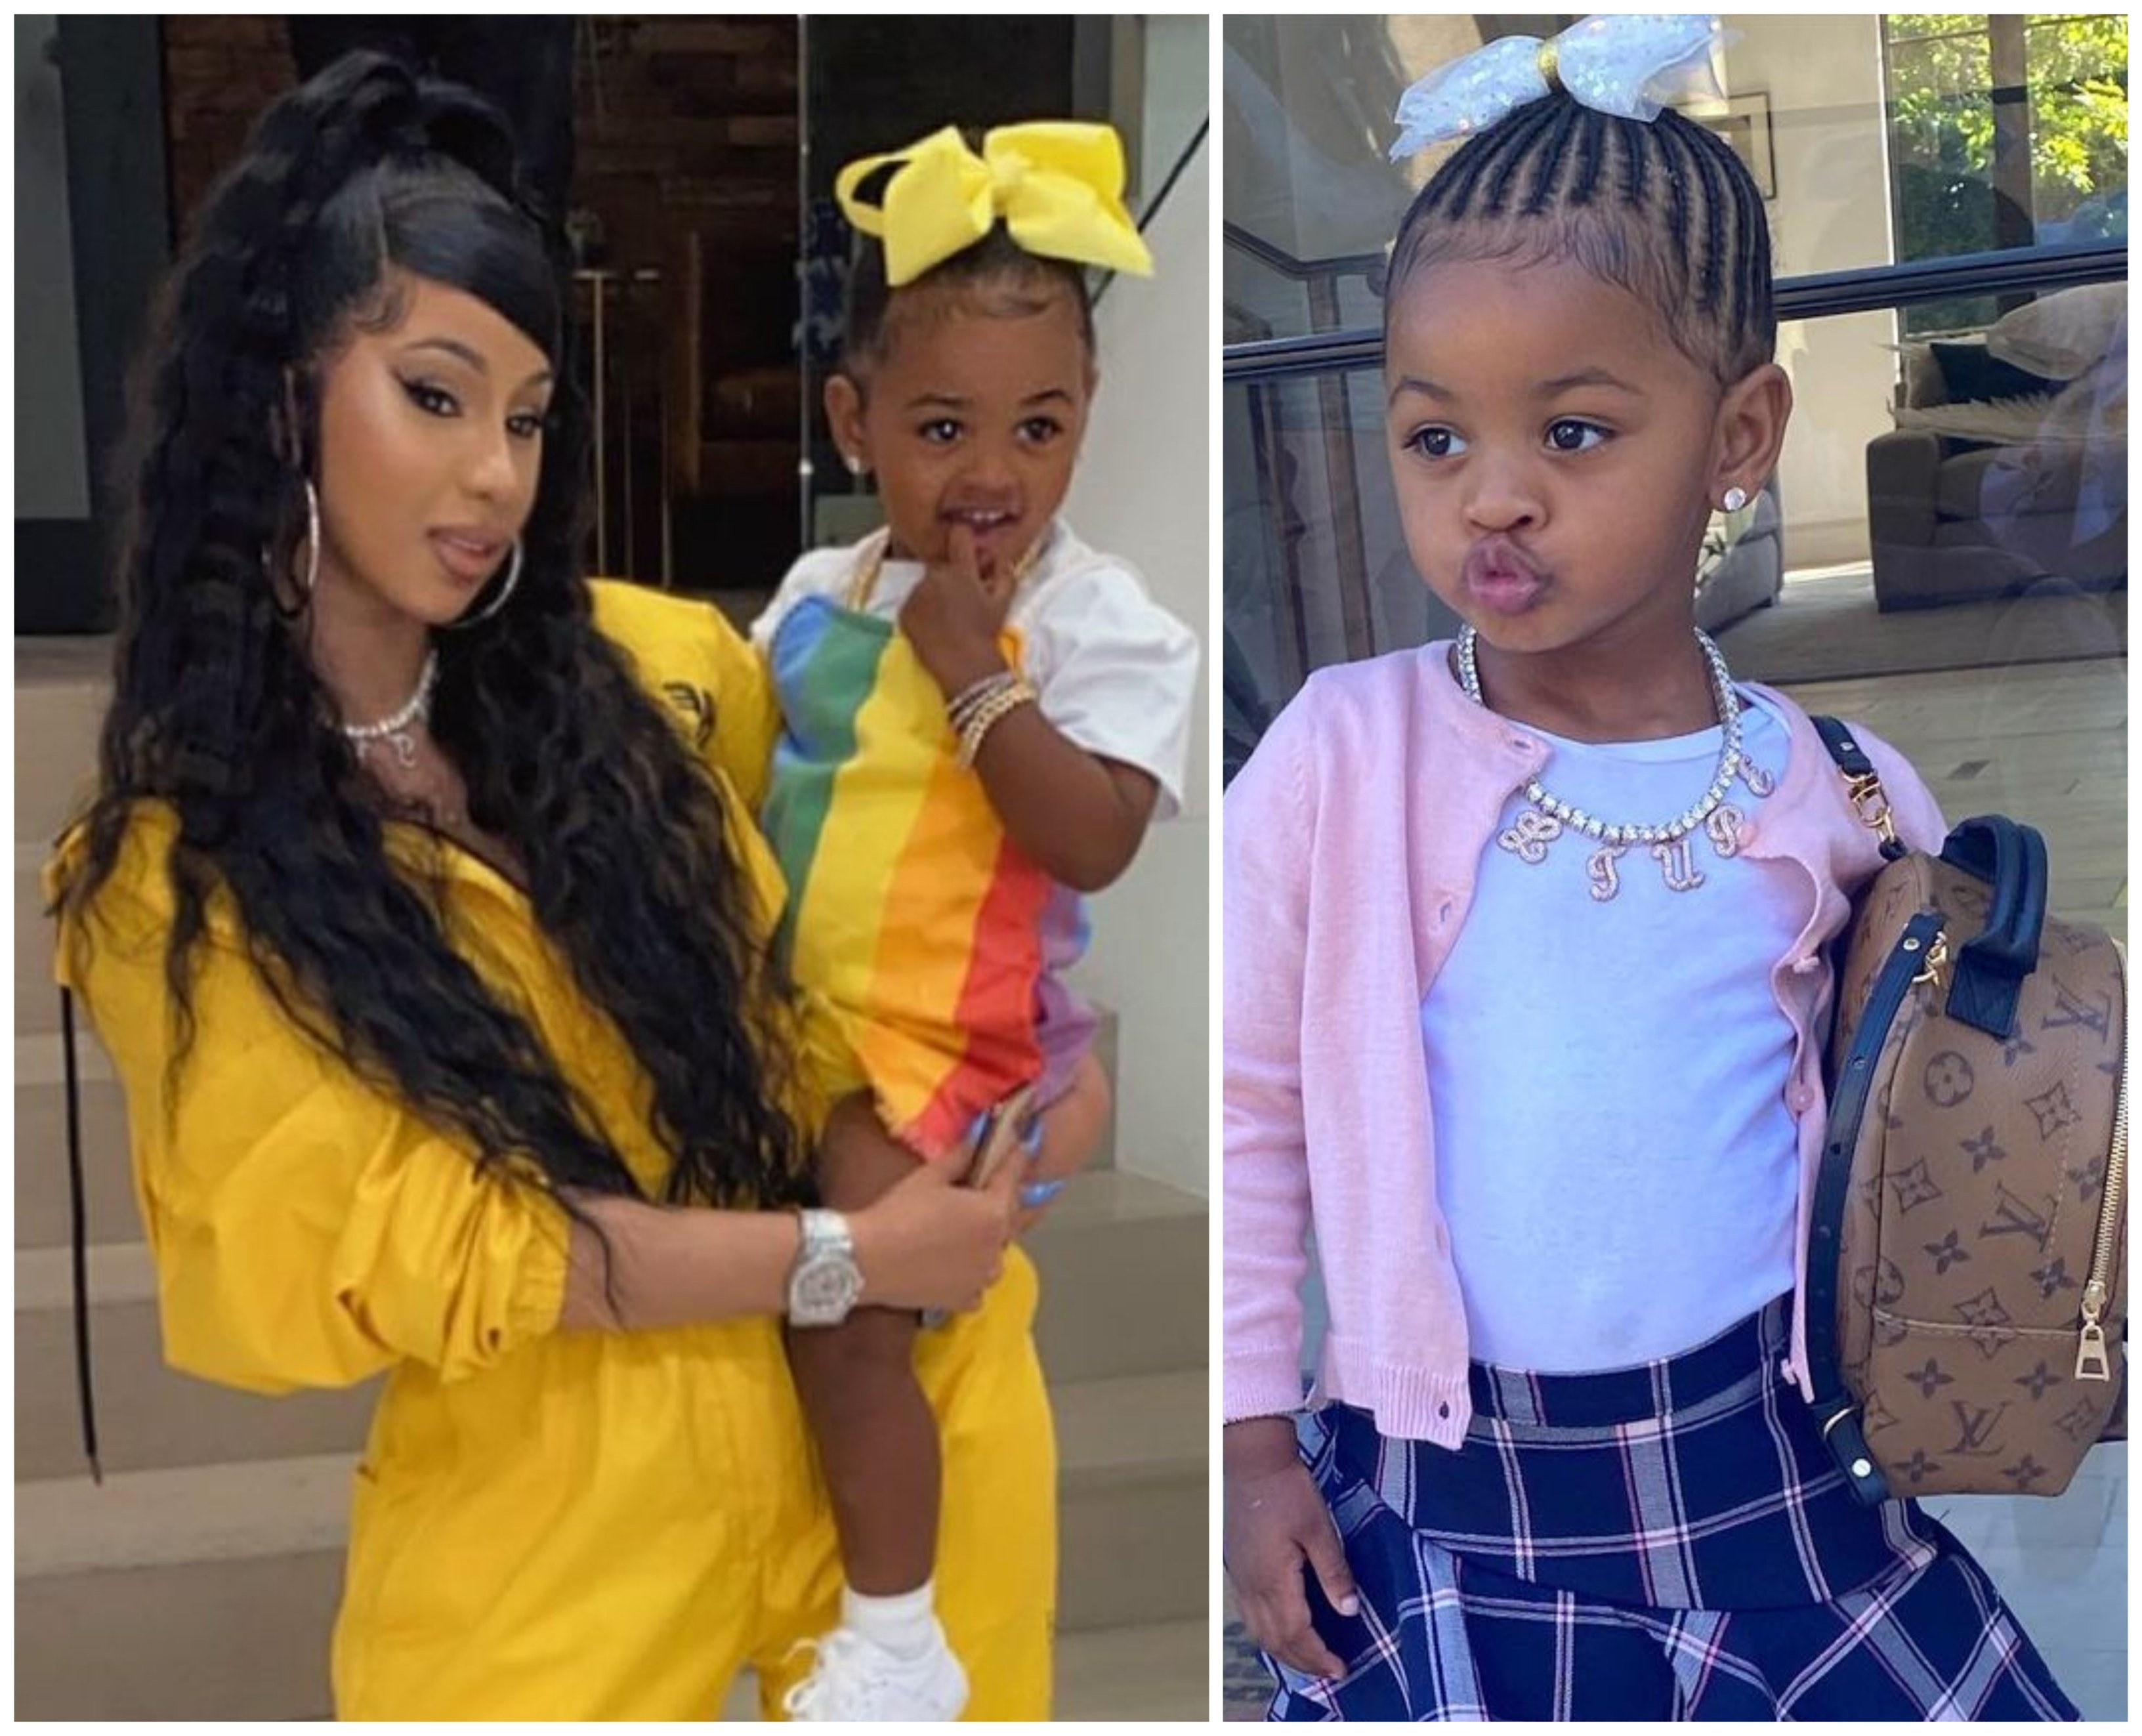 What do you get the four-year-old who has everything? Just ask Cardi B, who seems to outdo herself every year with daughter Kulture’s birthday gifts. Photo: @iamcardib/Instagram